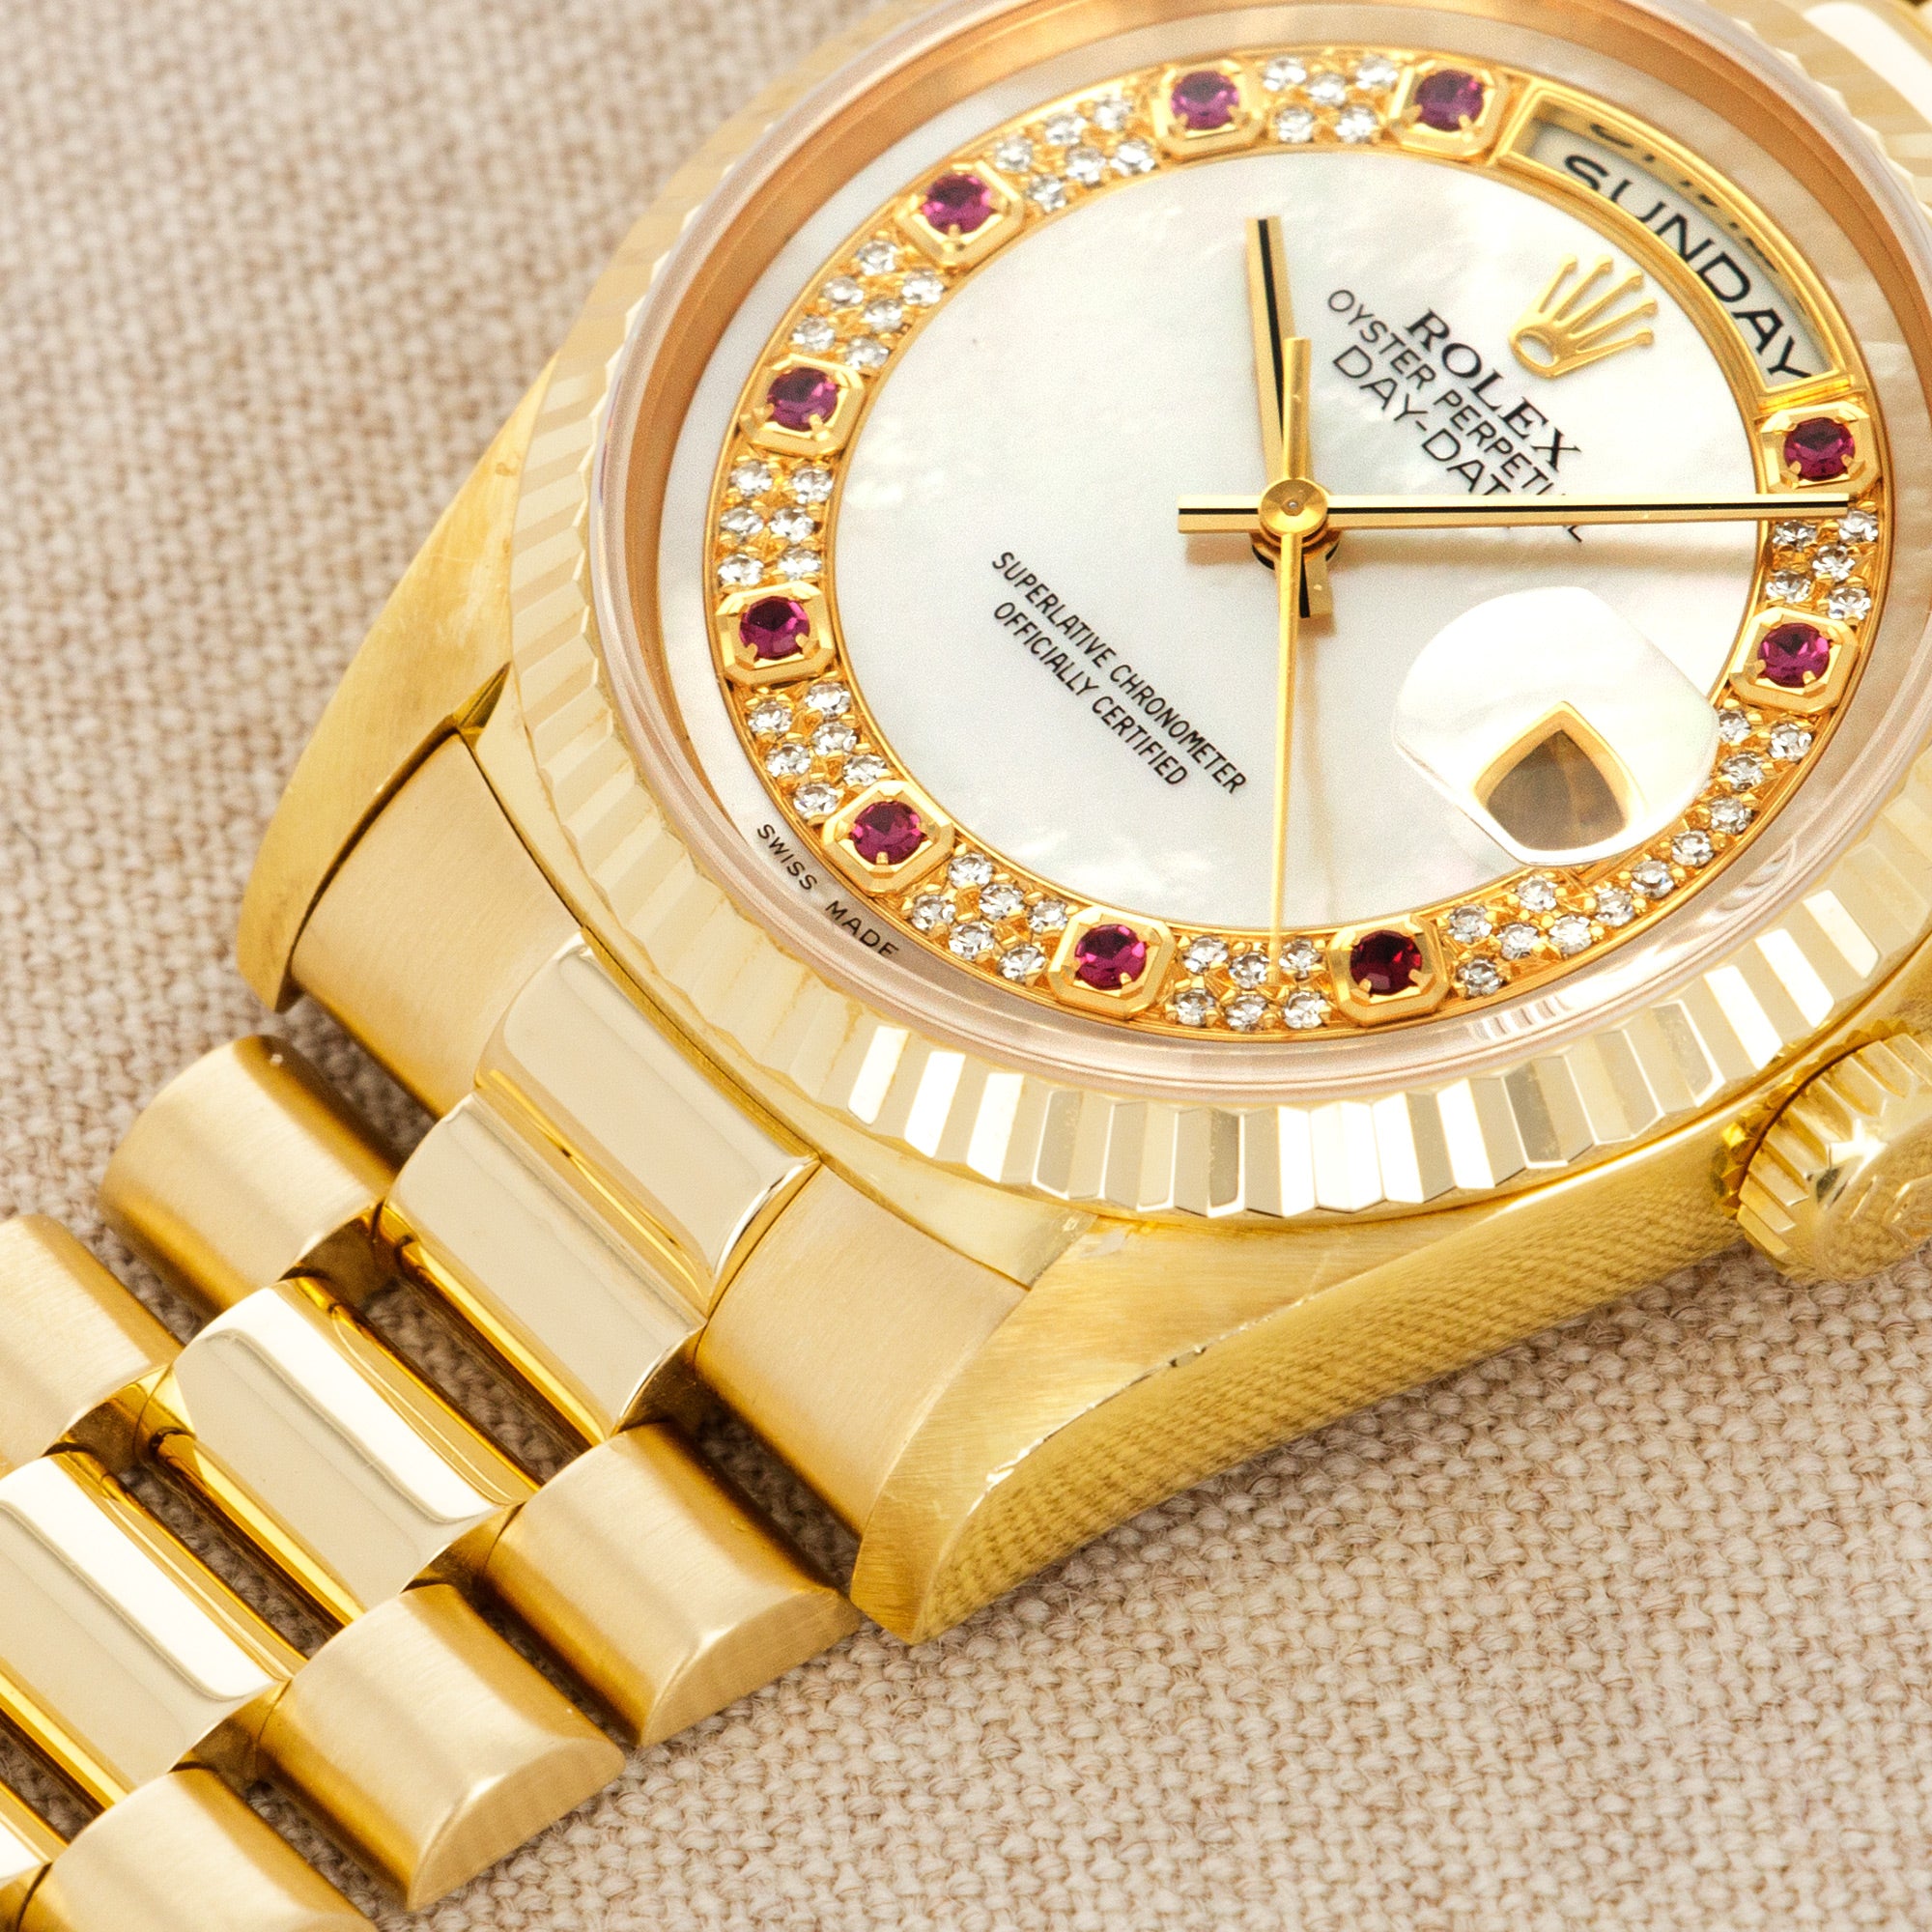 Rolex - Rolex Yellow Gold Day-Date Watch Ref. 18238 with Mother of Pearl and Ruby Dial - The Keystone Watches